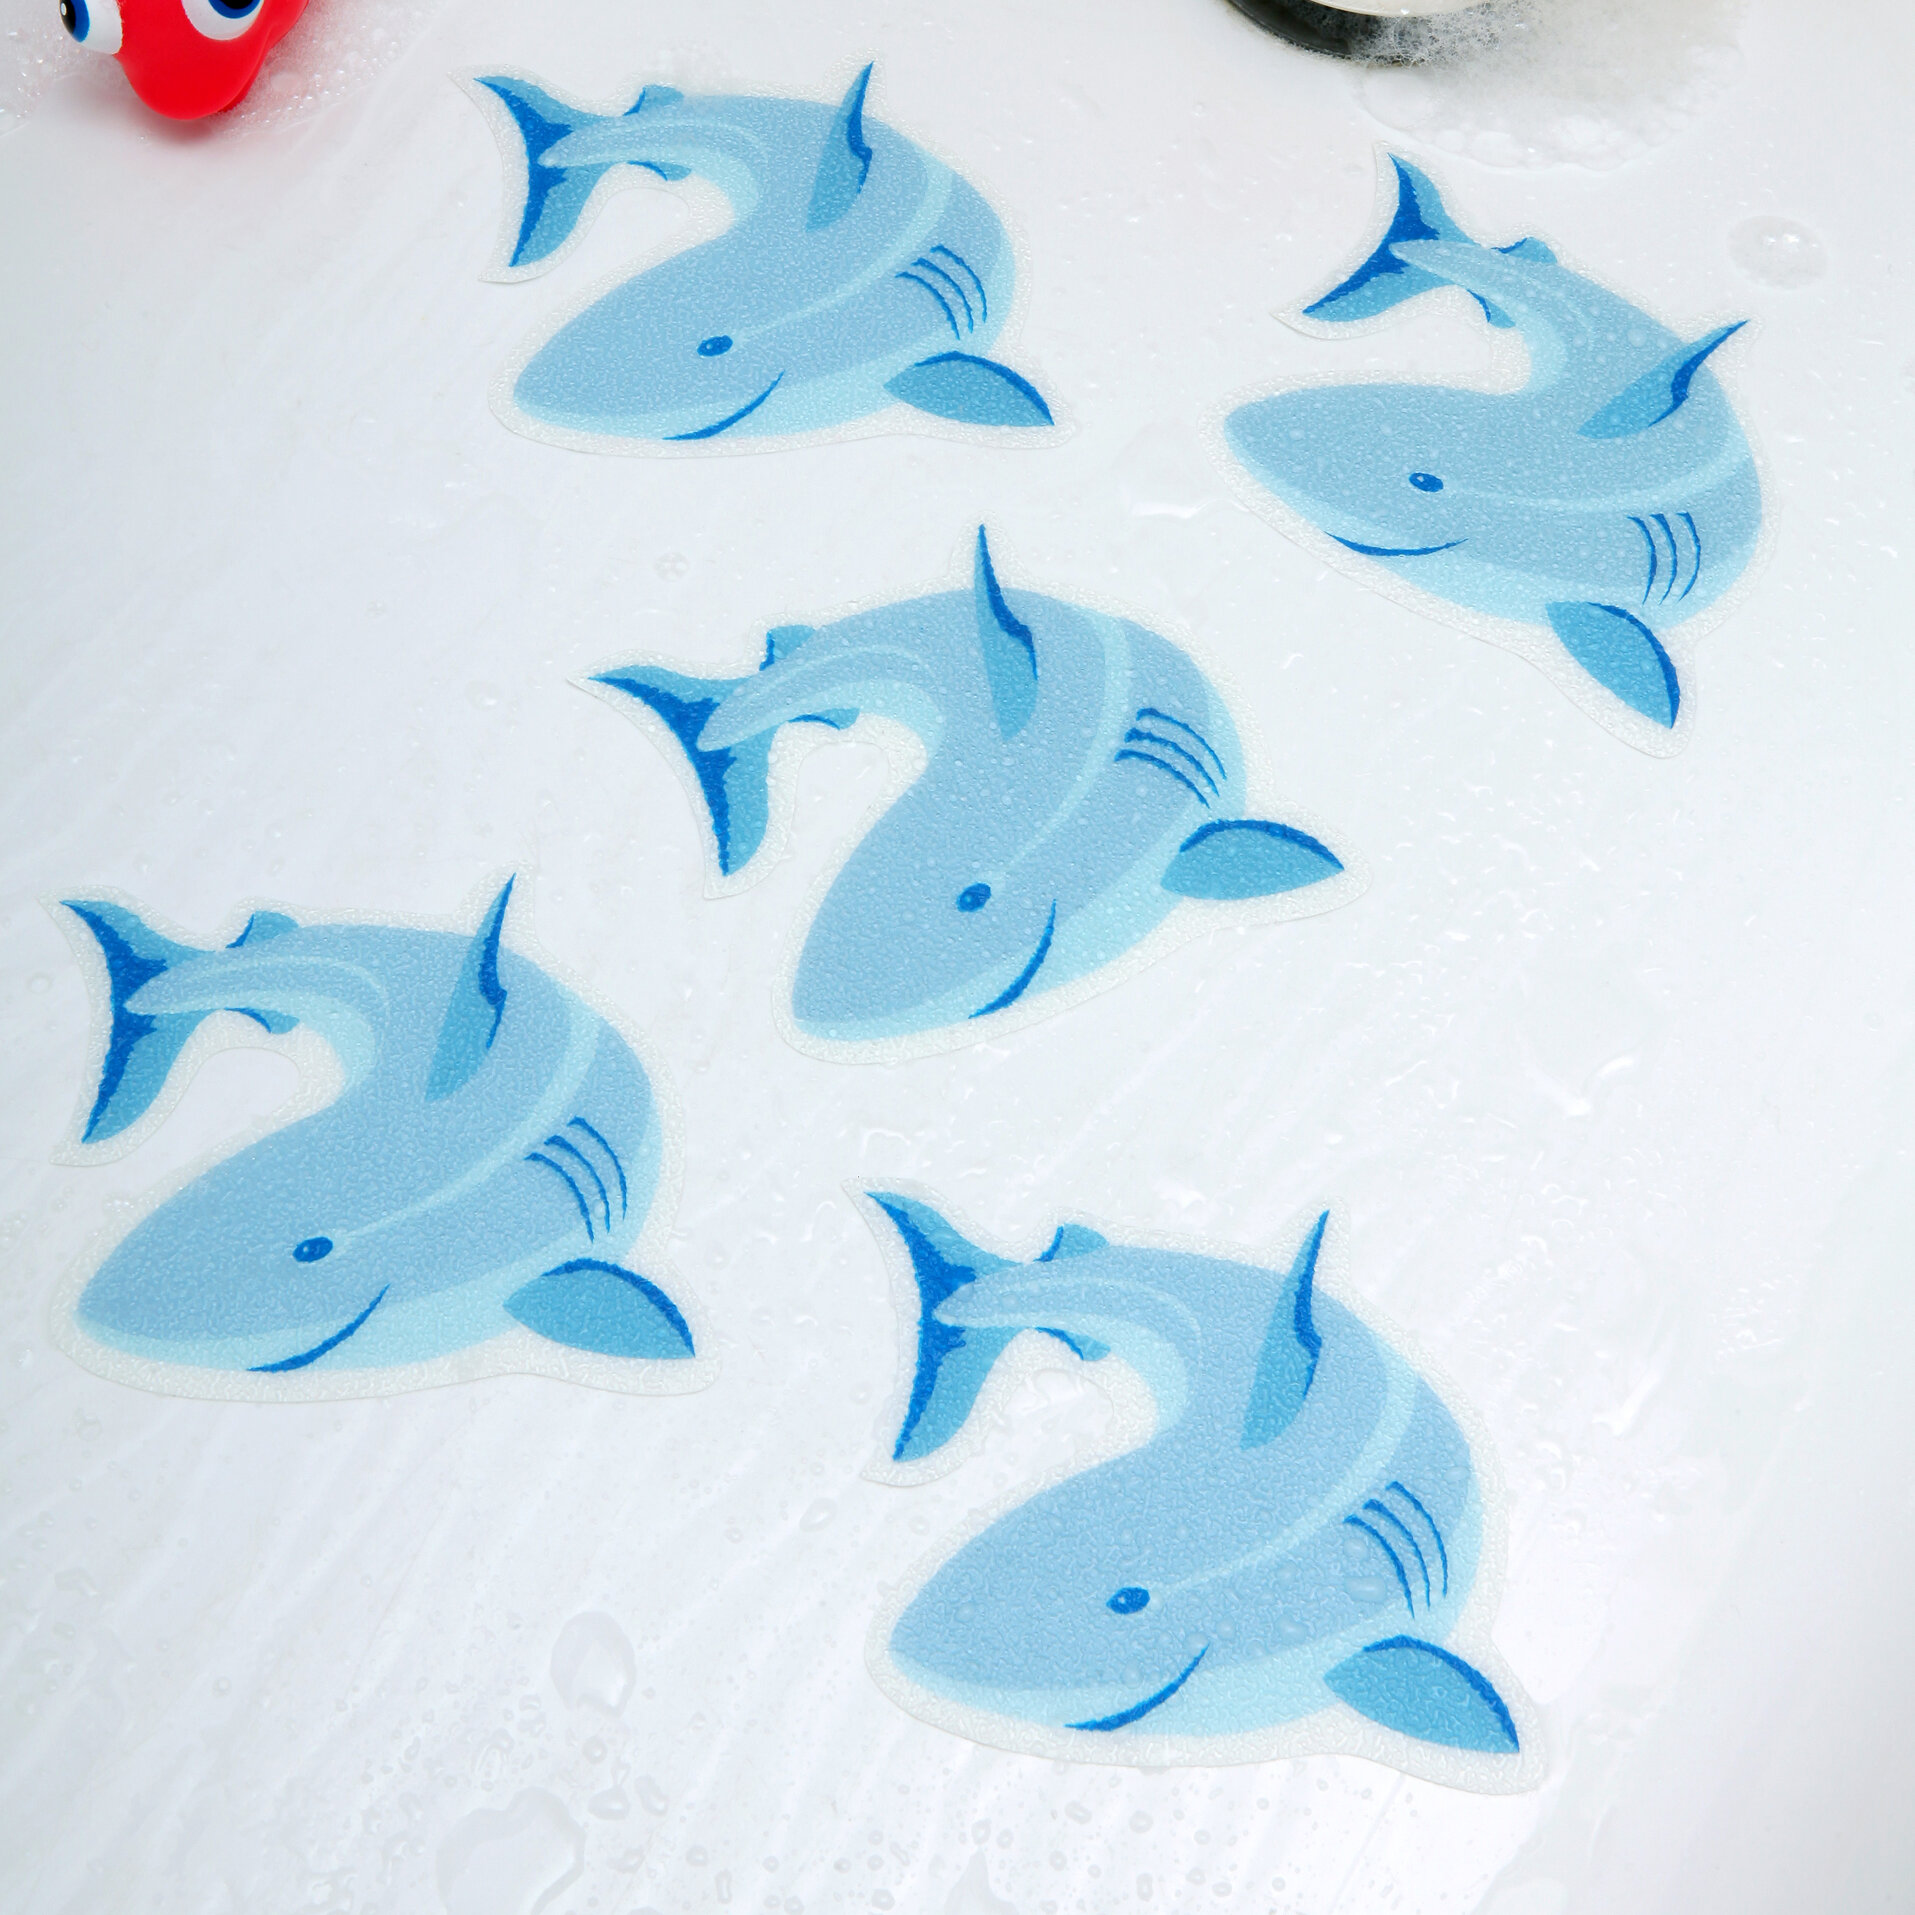 Shark Non-Slip Safety Applique Decal Stickers Bath Tub Shower Pack of 5 